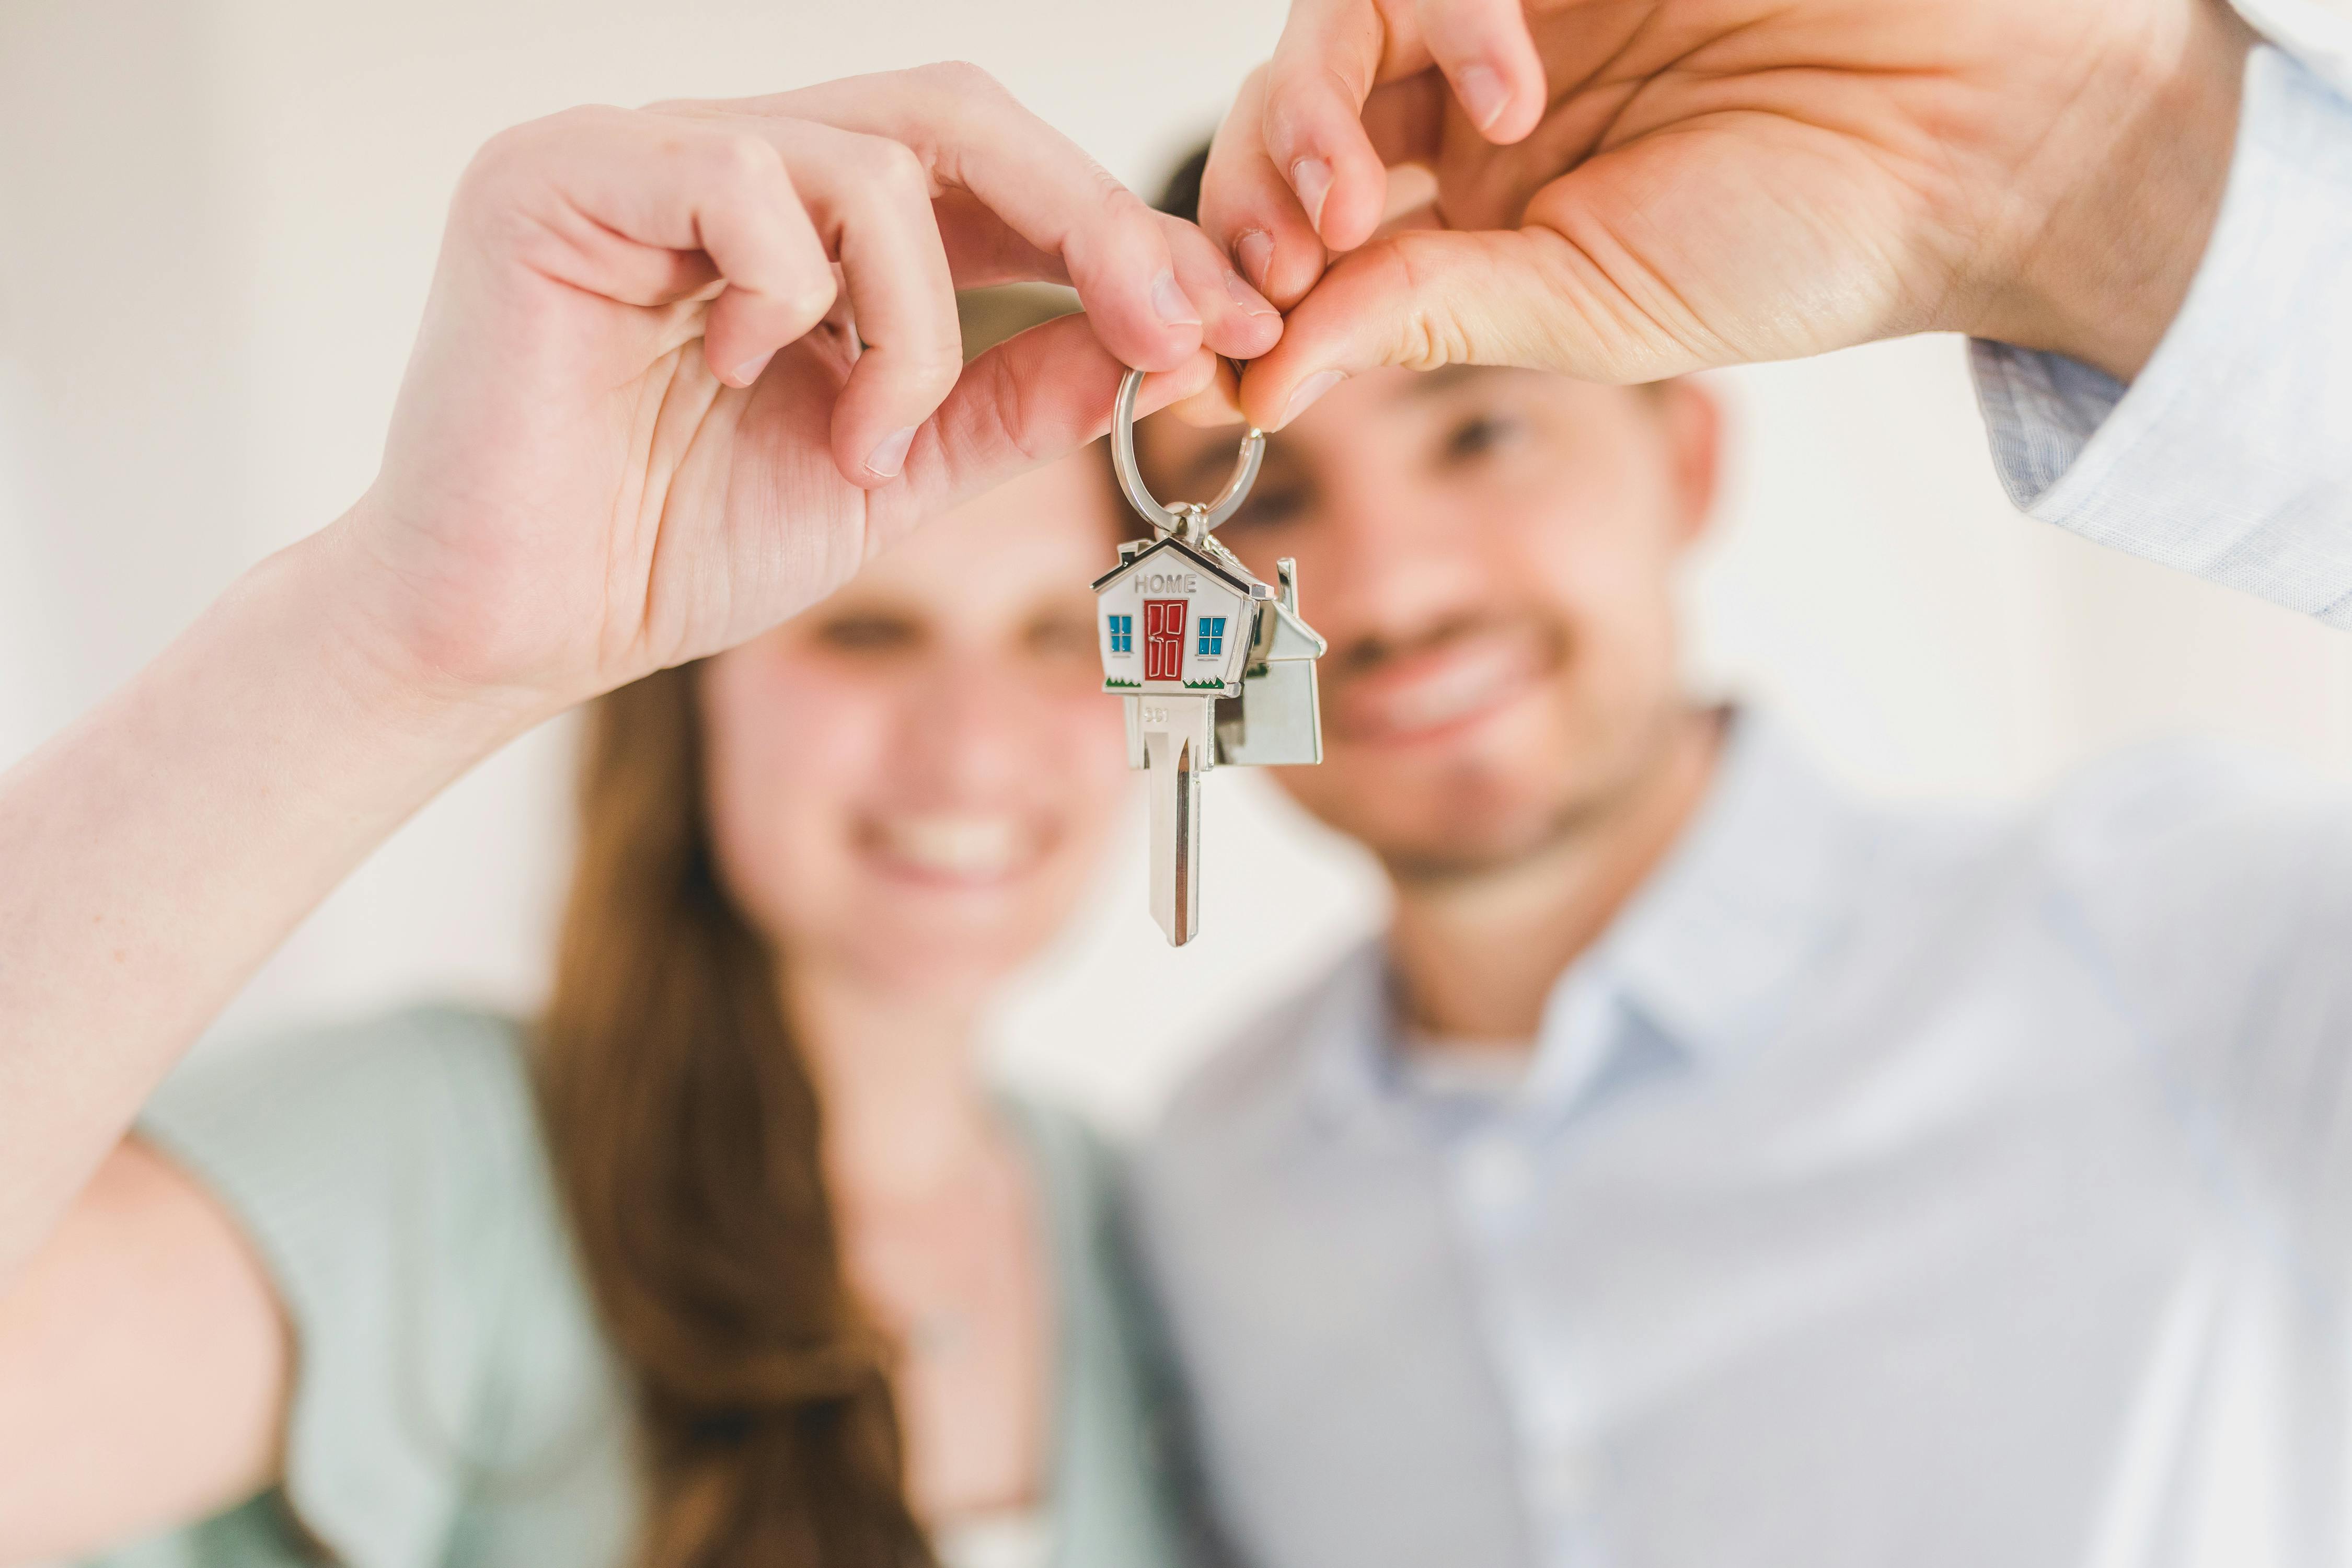 A young couple holding up a set of house keys | Source: RDNE Stock project on Pexels